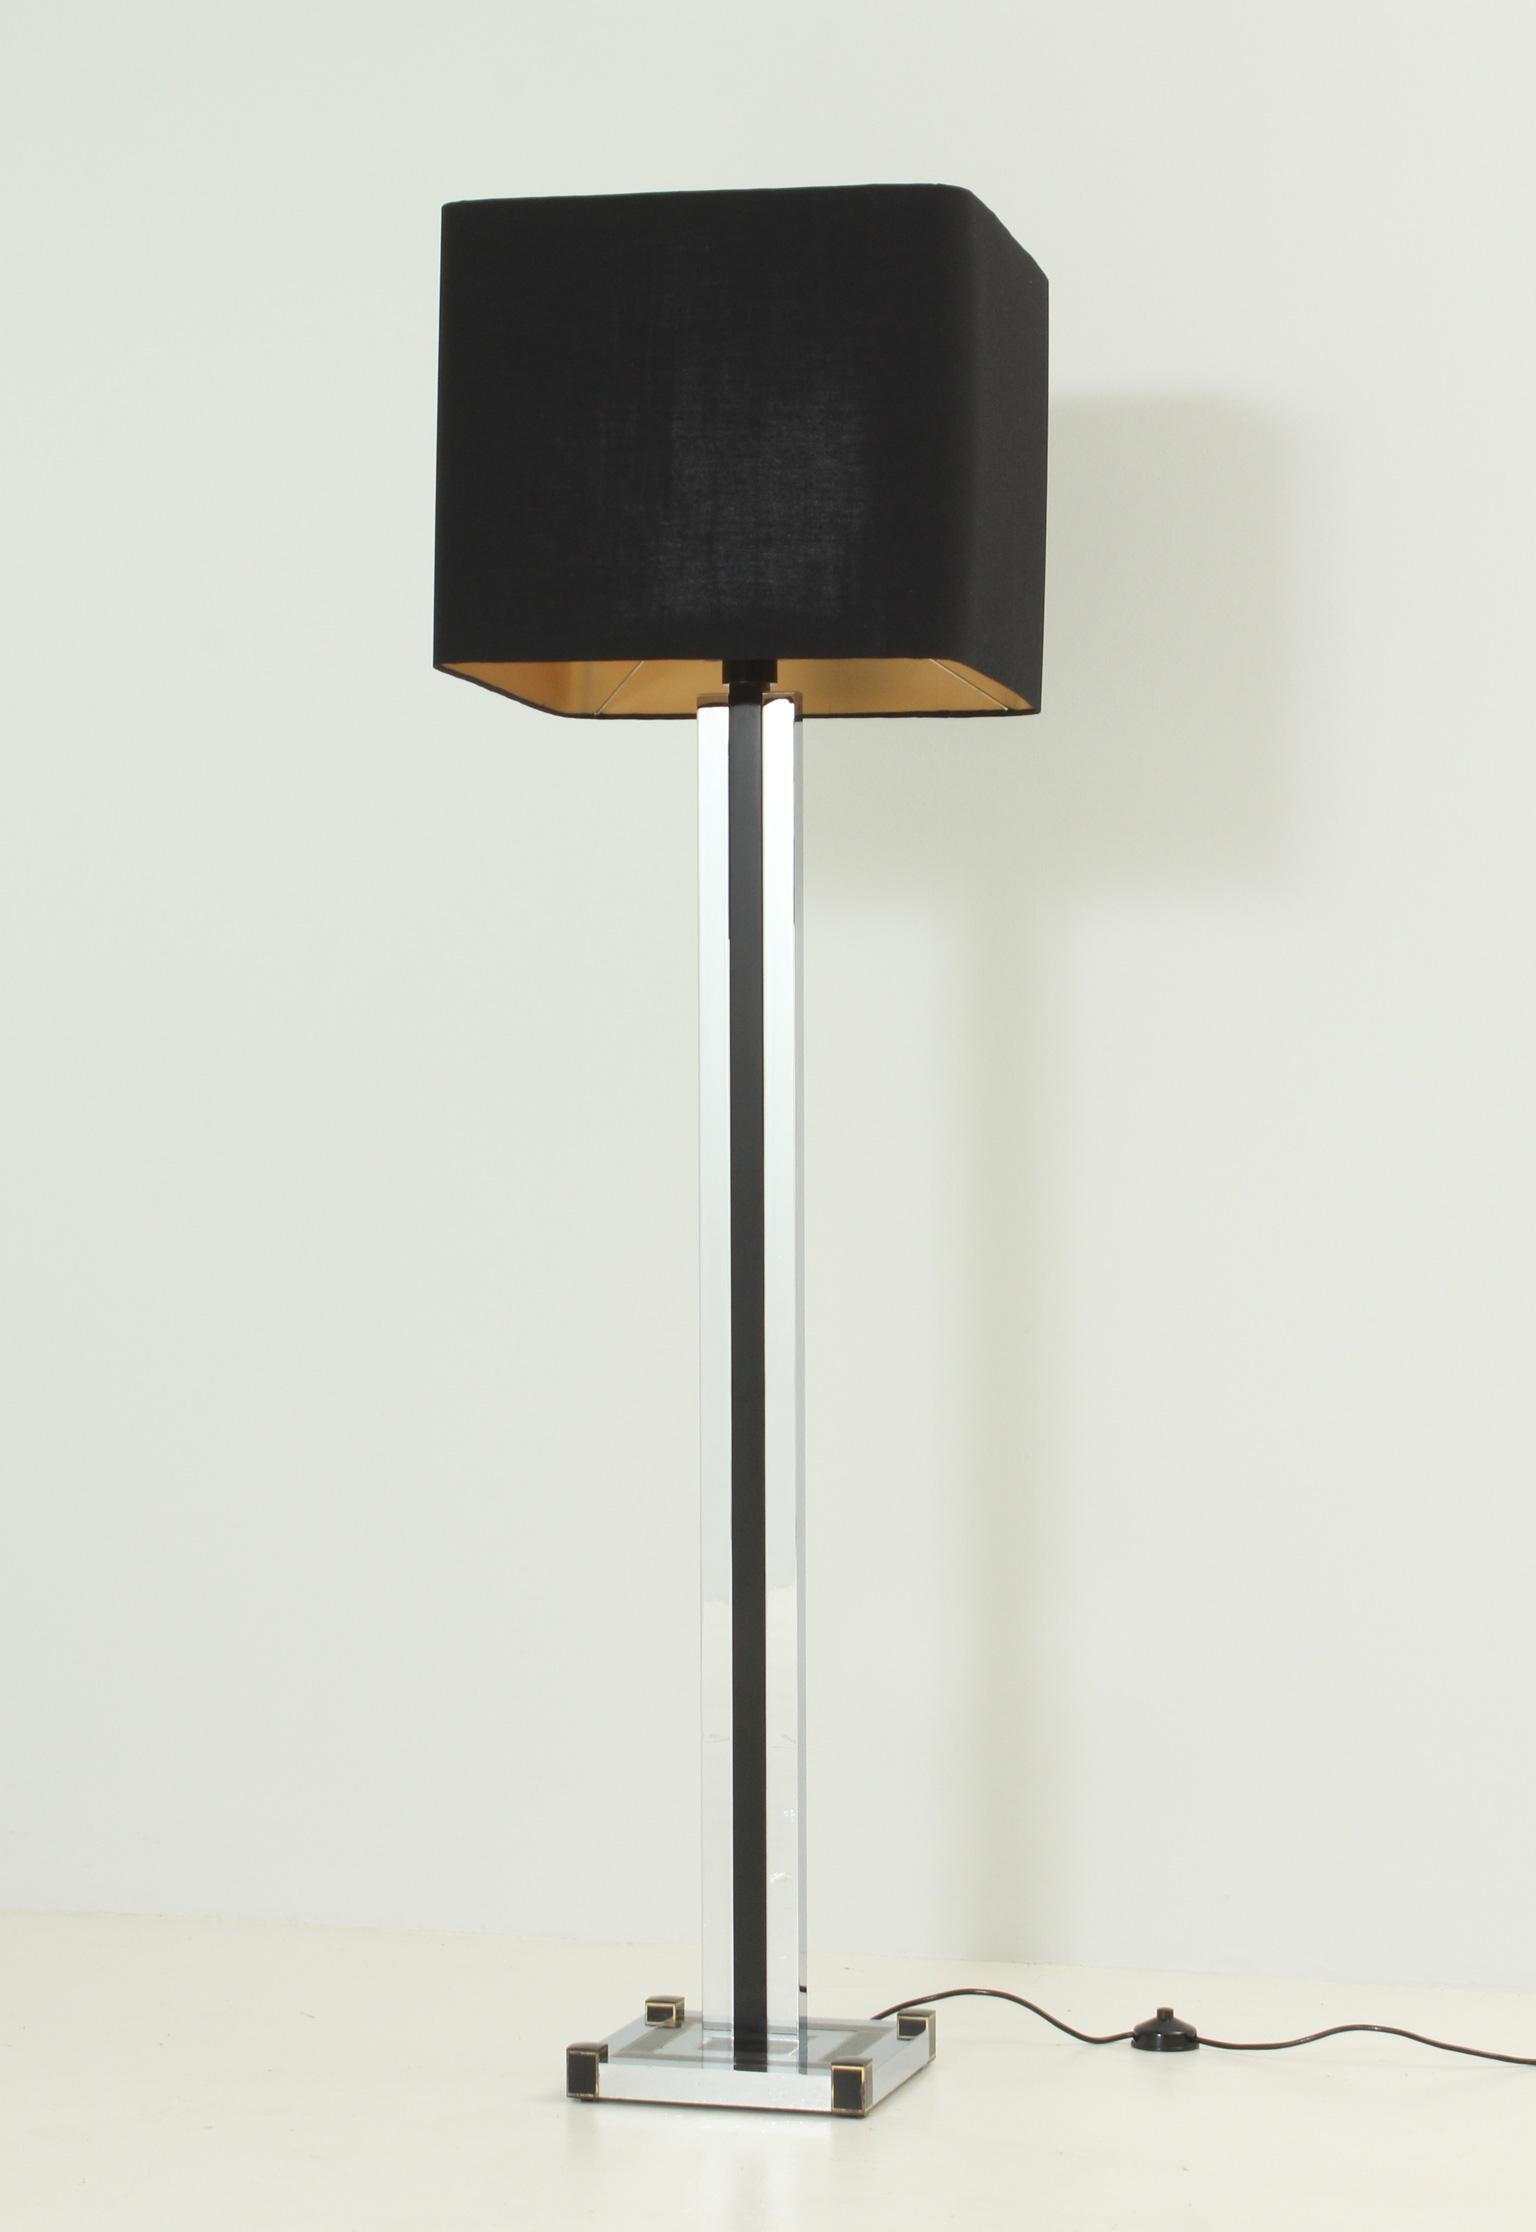 Floor lamp designed in 1970's by Lumica, Spain. Chrome metal, brass and lacquered metal base supporting three bulbs and a square shade with new fabric.